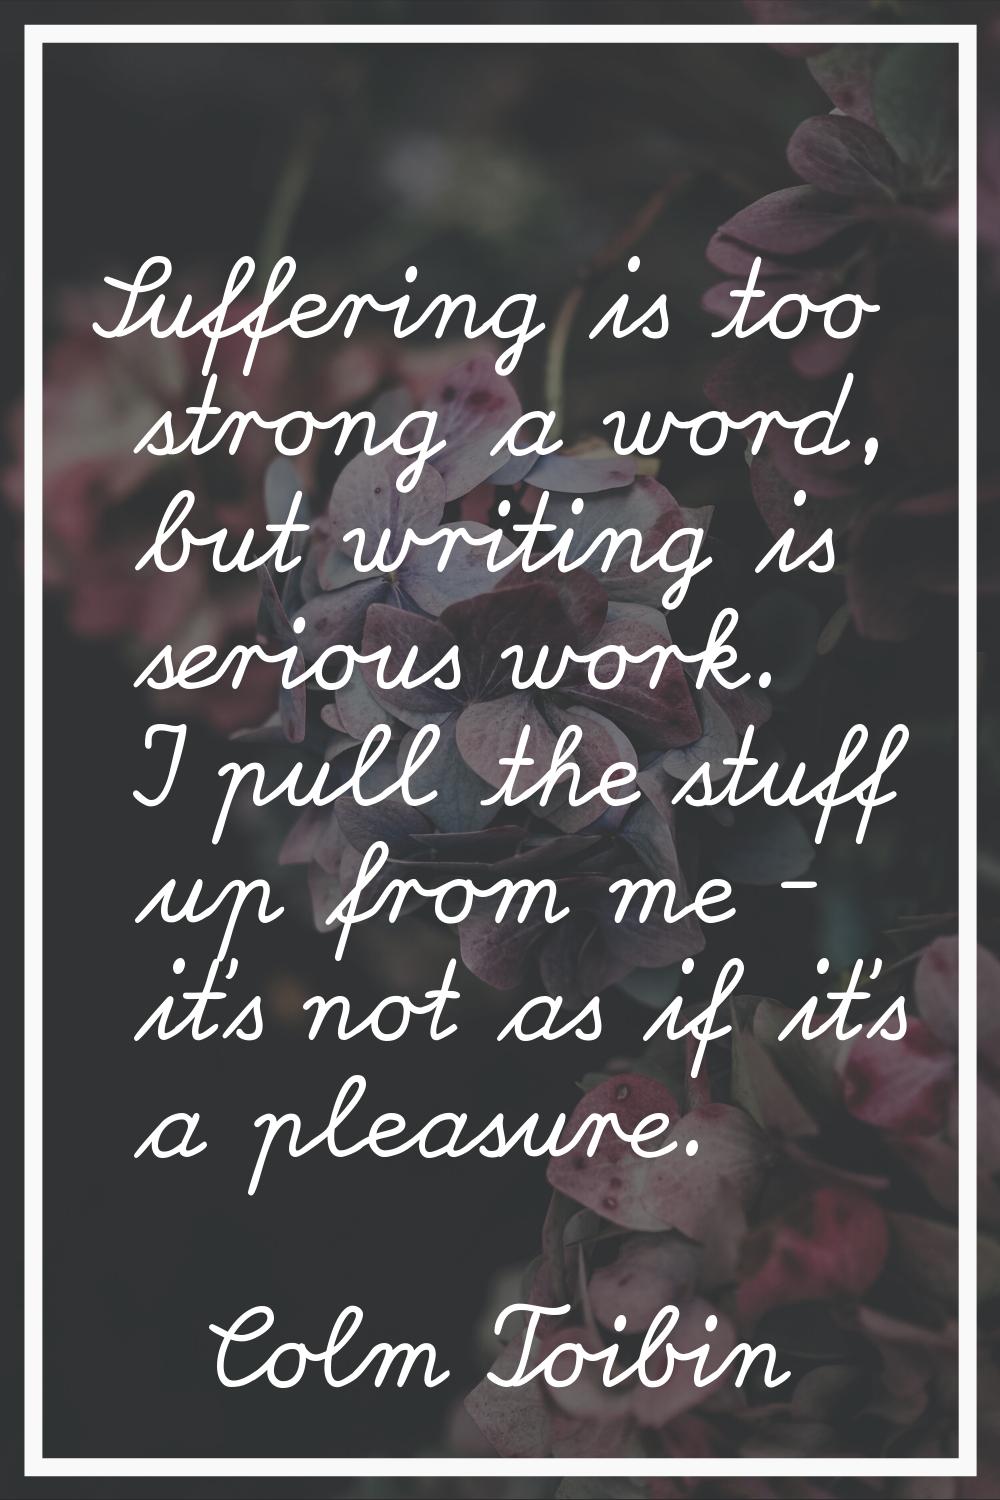 Suffering is too strong a word, but writing is serious work. I pull the stuff up from me - it's not